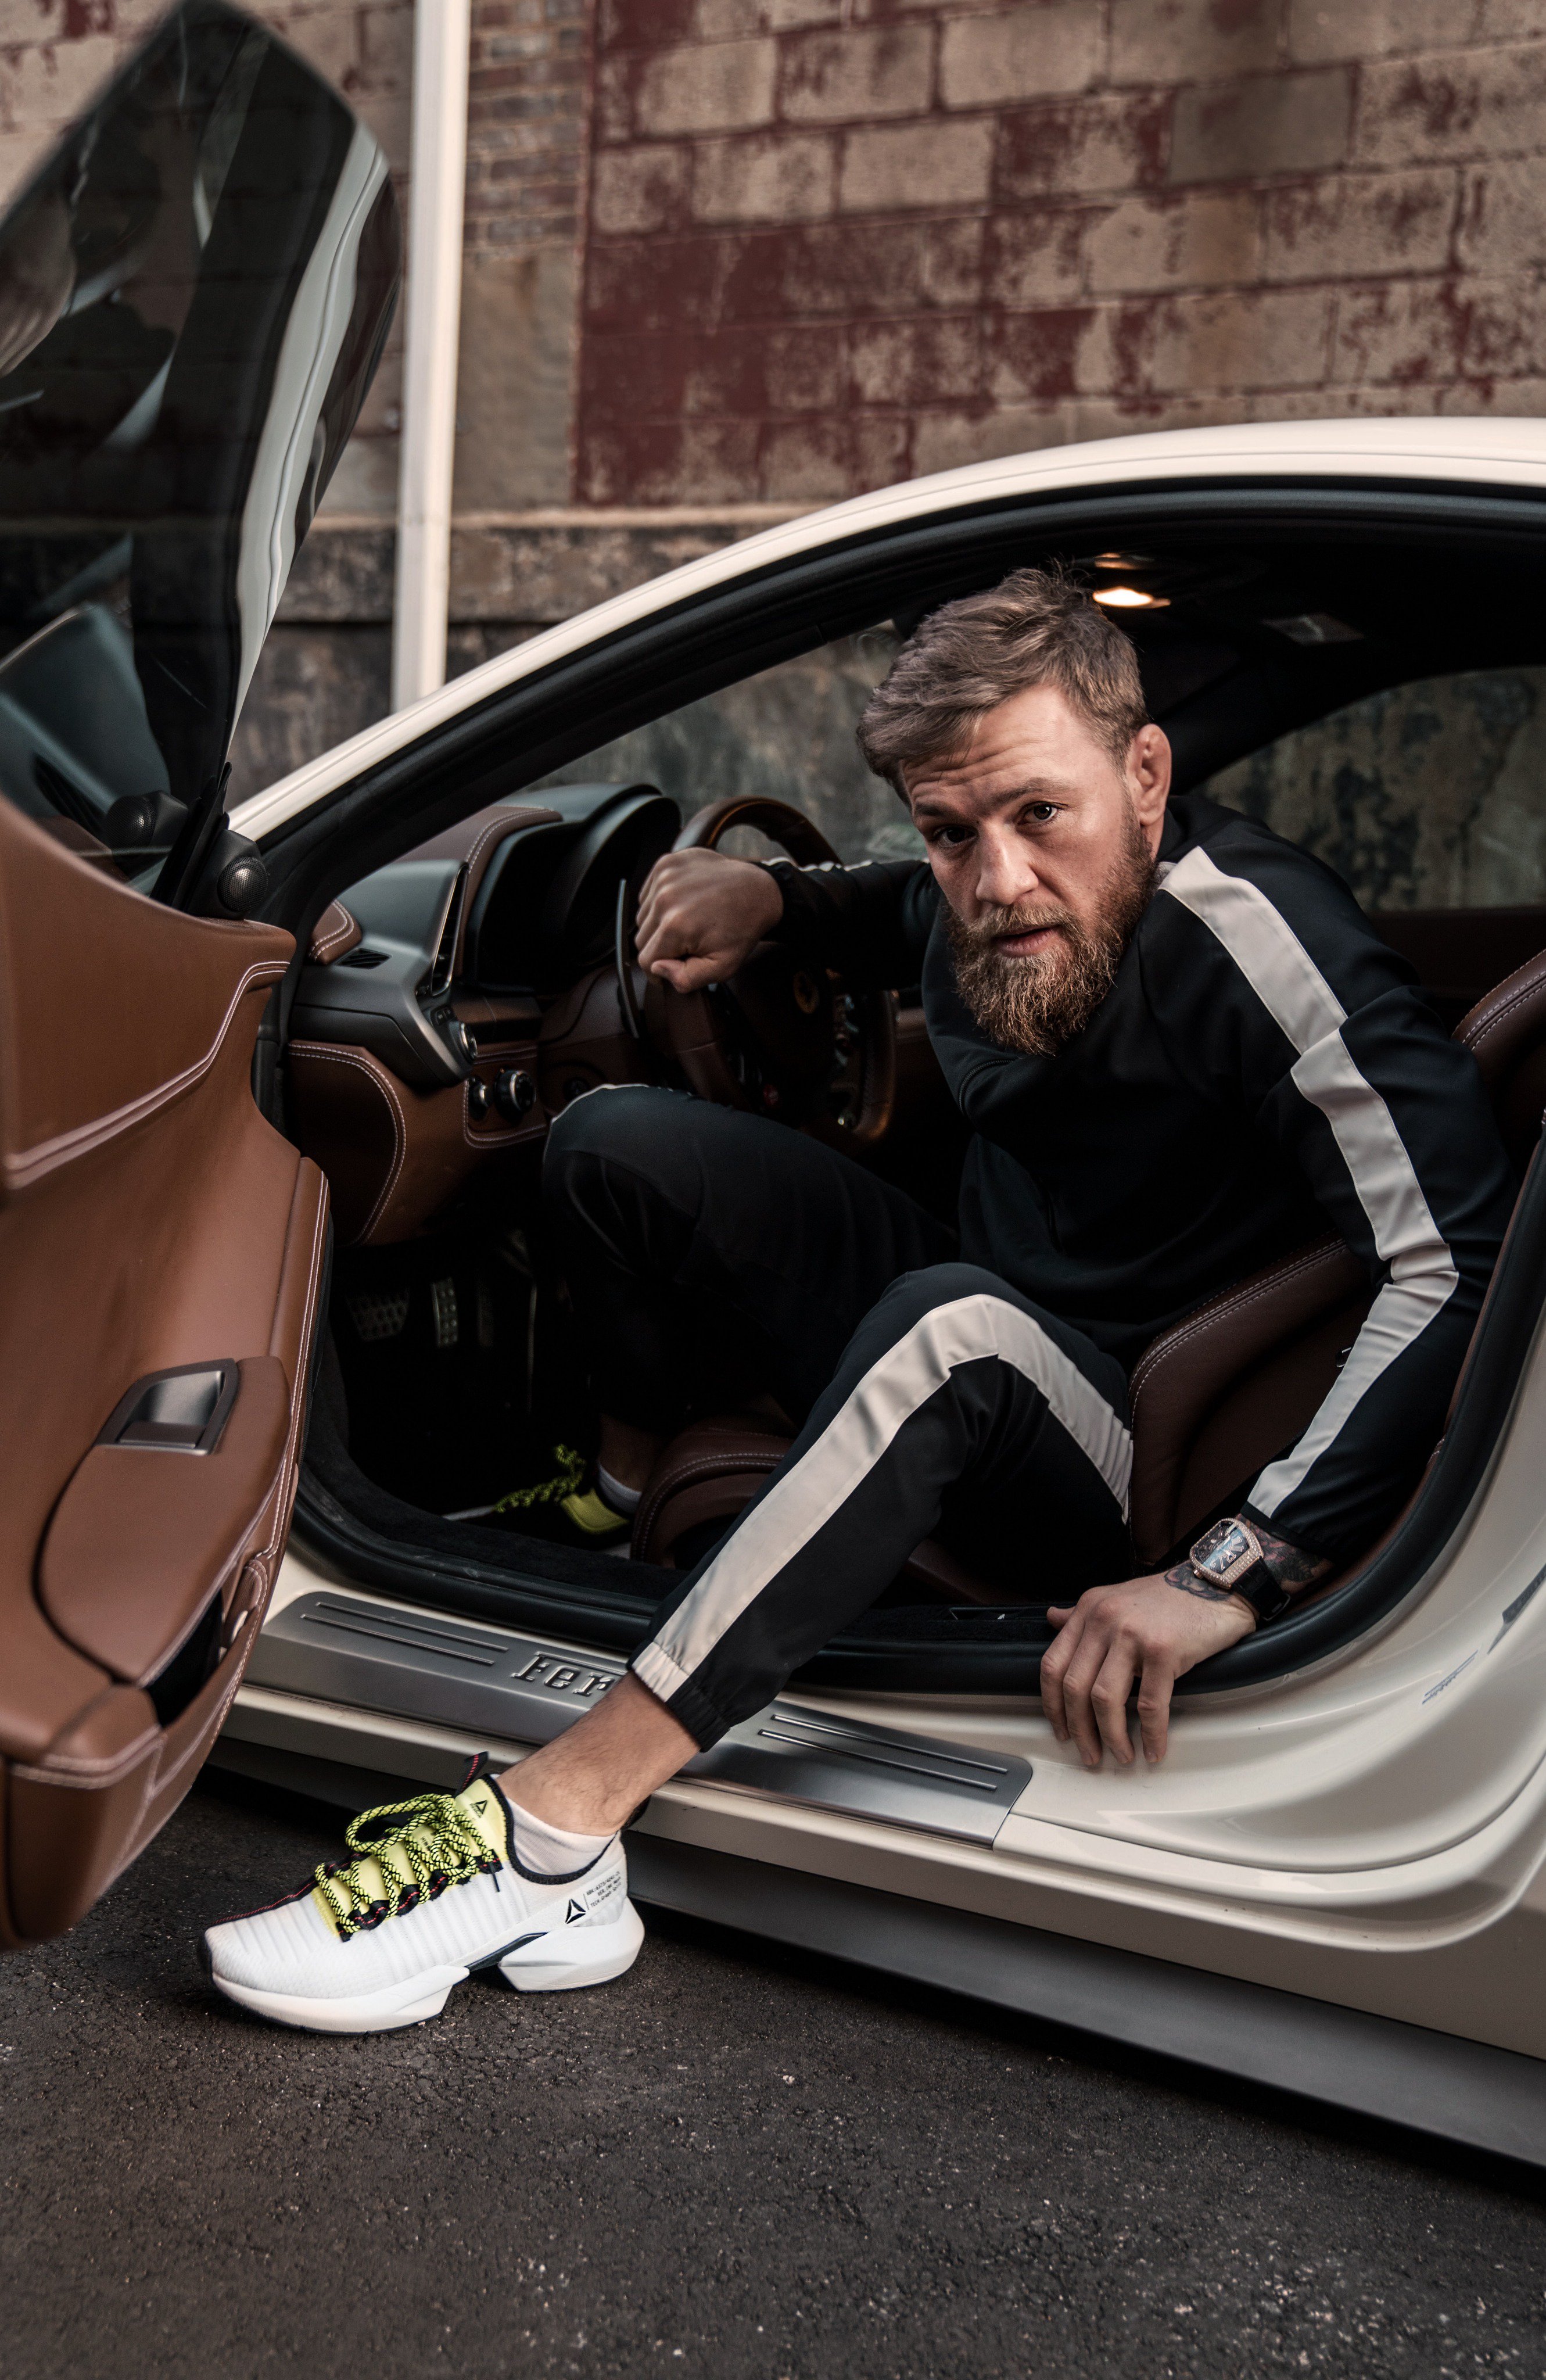 Conor McGregor on Twitter: "Fresh new Sole Fury's my team Reebok. My shoes will always be better than yours! #SplitFrom | @Reebok new #SoleFury https://t.co/PLrhmHa3rt" / Twitter